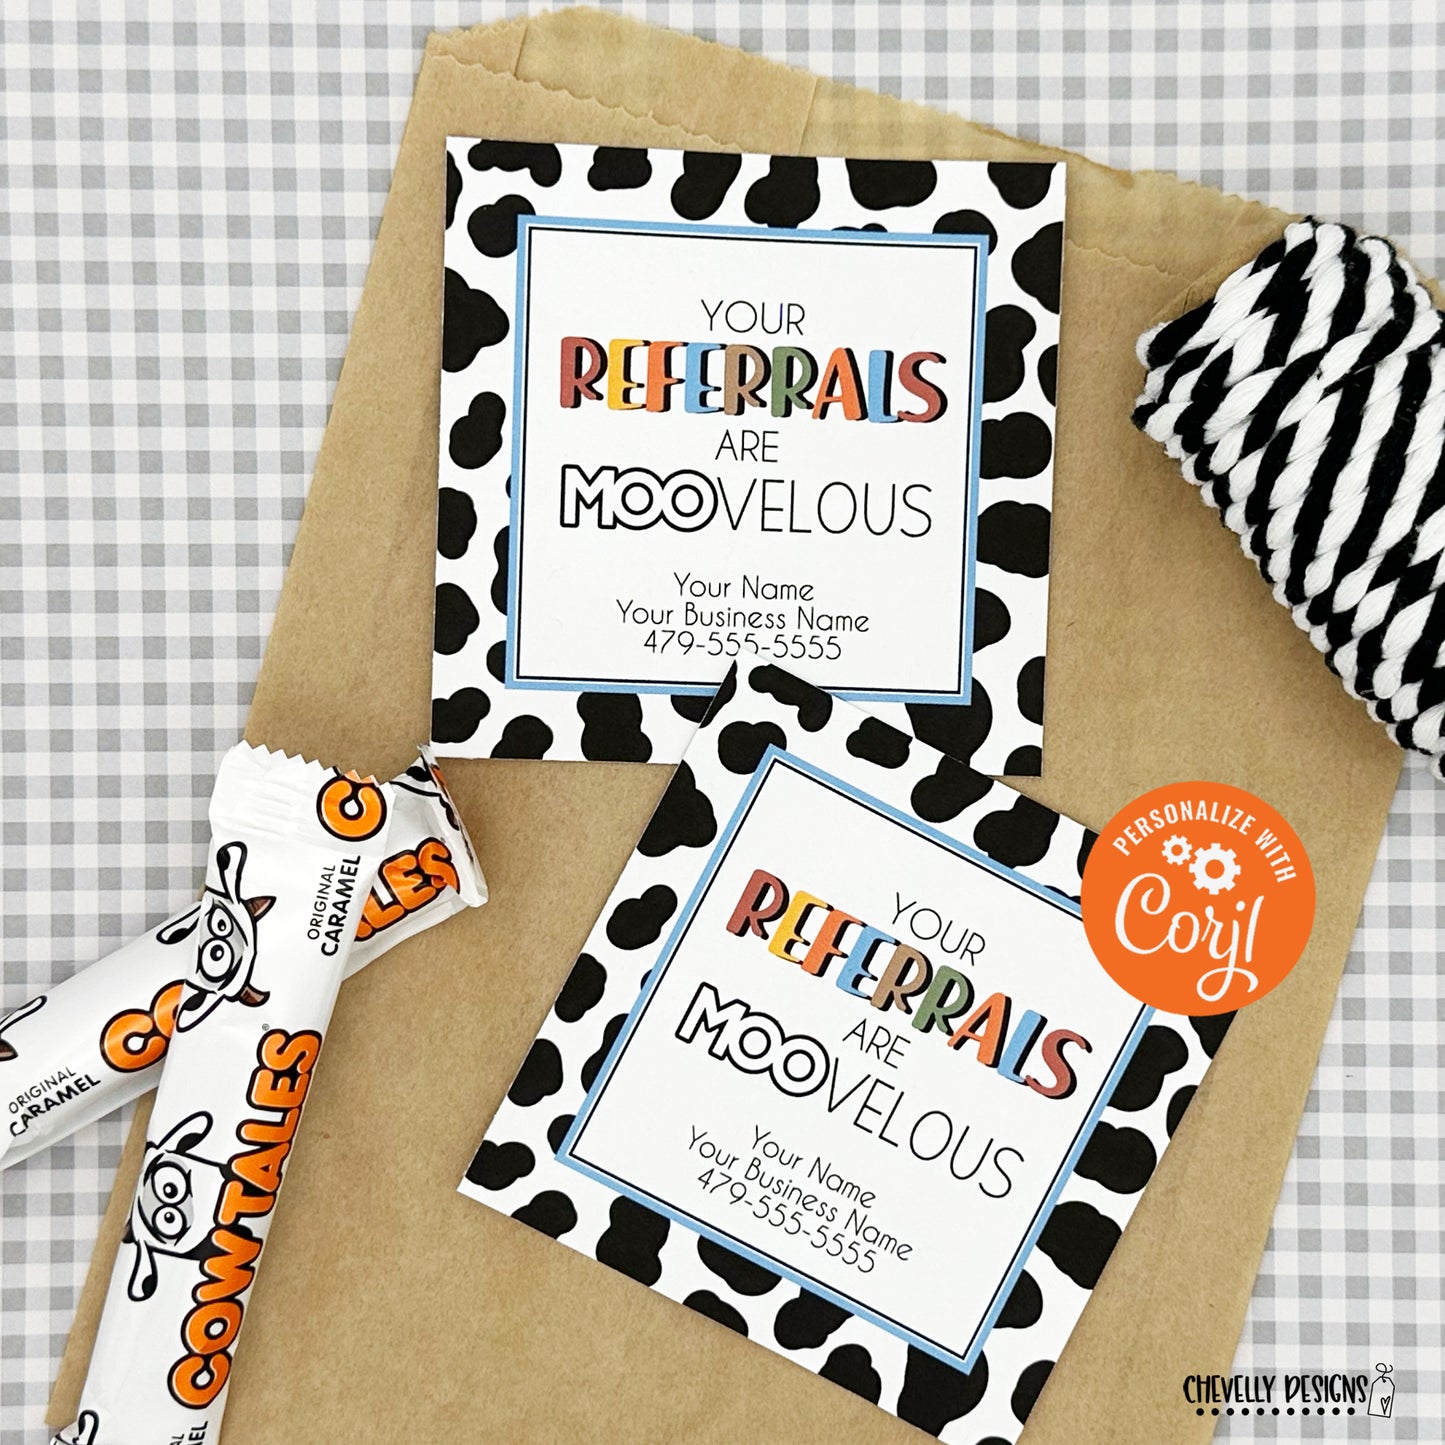 EDITABLE - Your Referrals are MOO-velous - Business Marketing Gift Tags - Printable Digital File